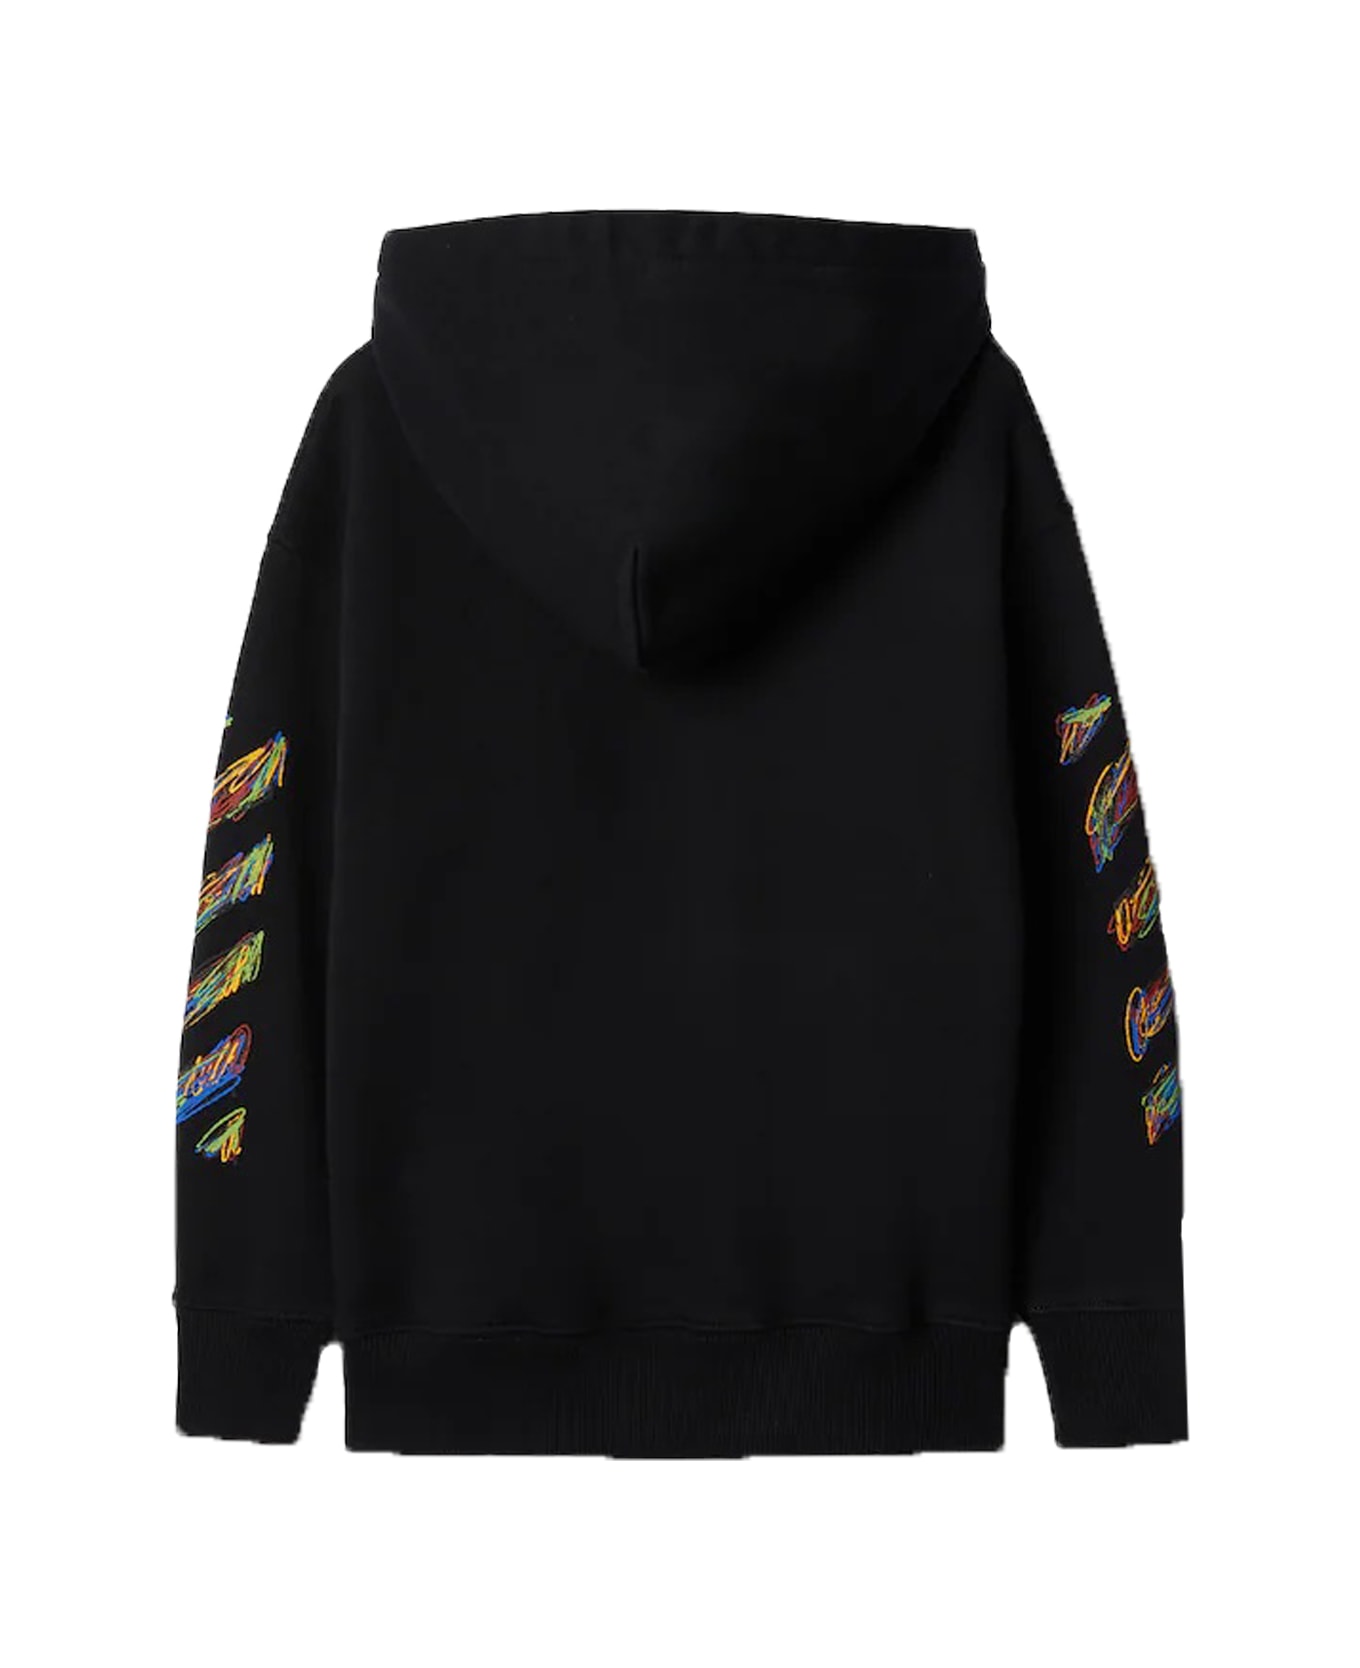 Off-White Sweatshirt With Hood And Sketch Logo - Back